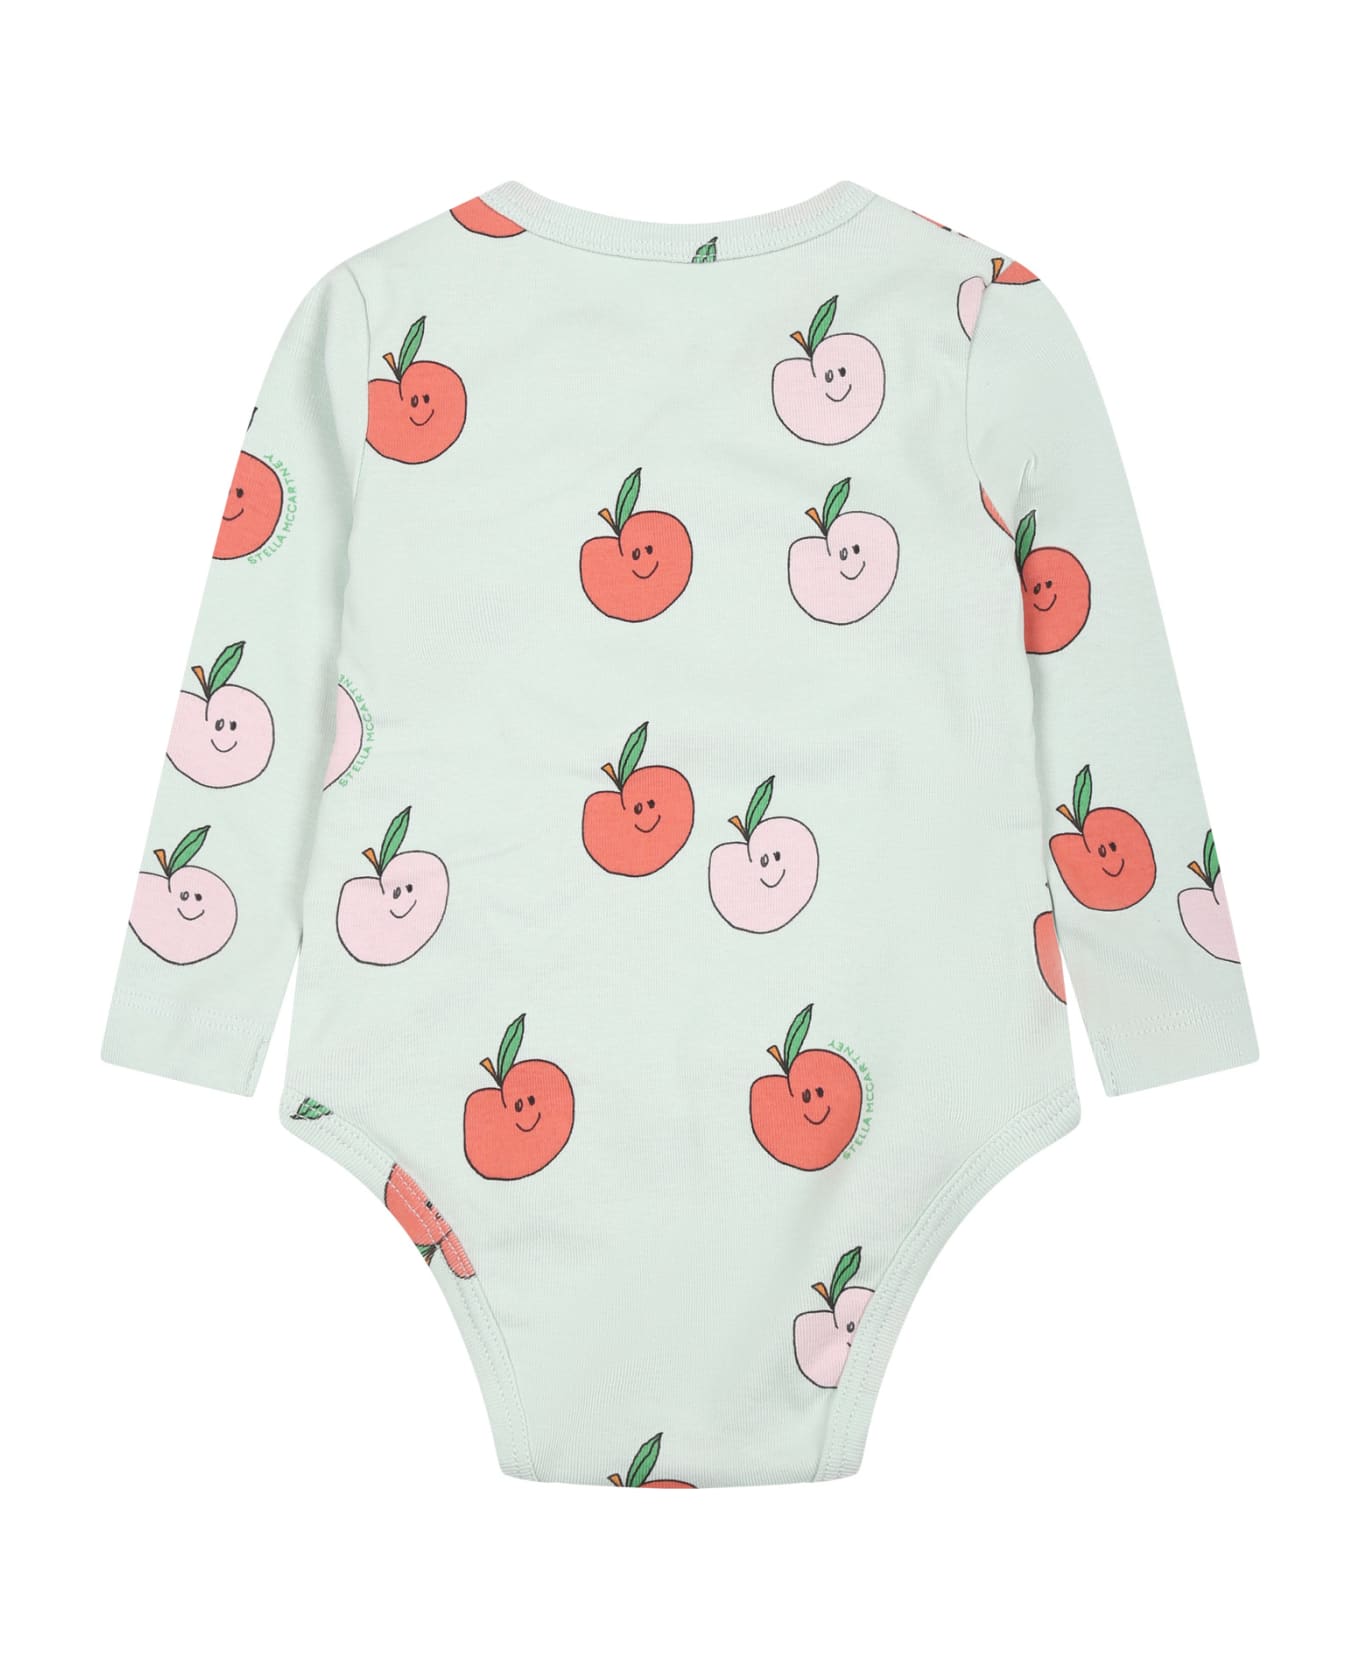 Stella McCartney Kids Multicolor Set For Baby Girl With Apples - Multicolor